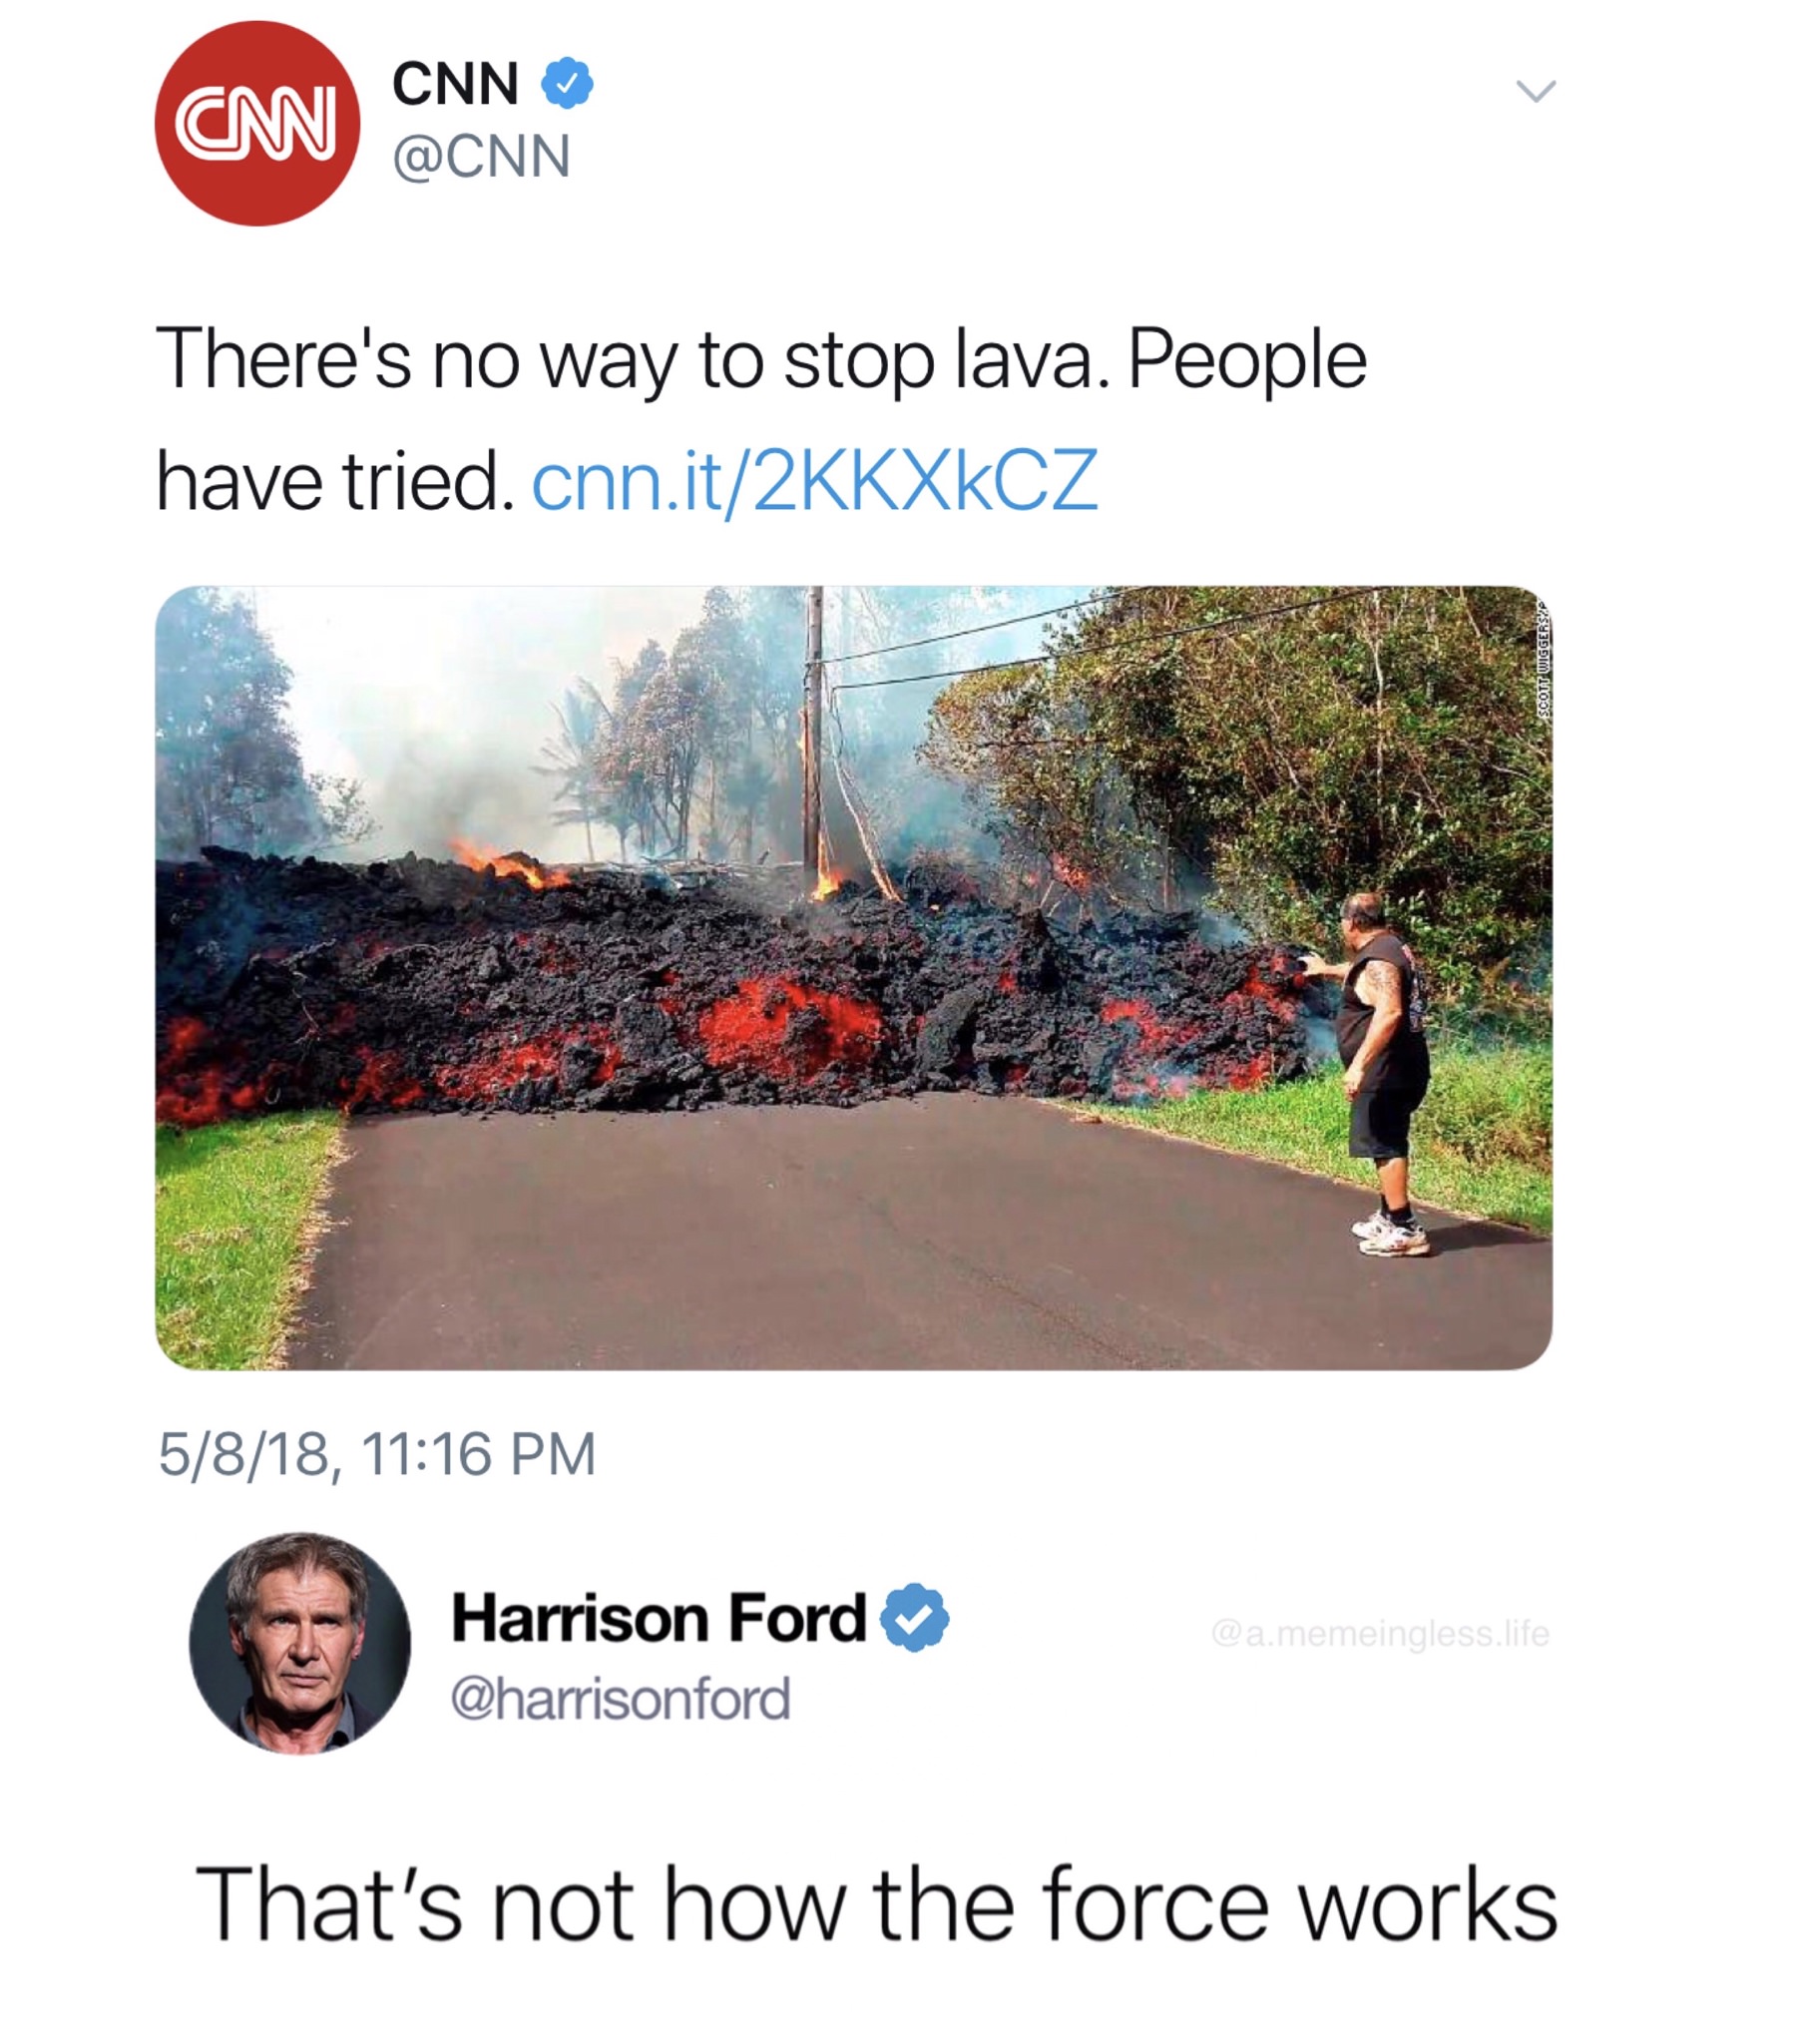 memes - stop the lava meme - Cnn Cnn There's no way to stop lava. People have tried.cnn.it2KKXKCZ 5818, Harrison Ford That's not how the force works